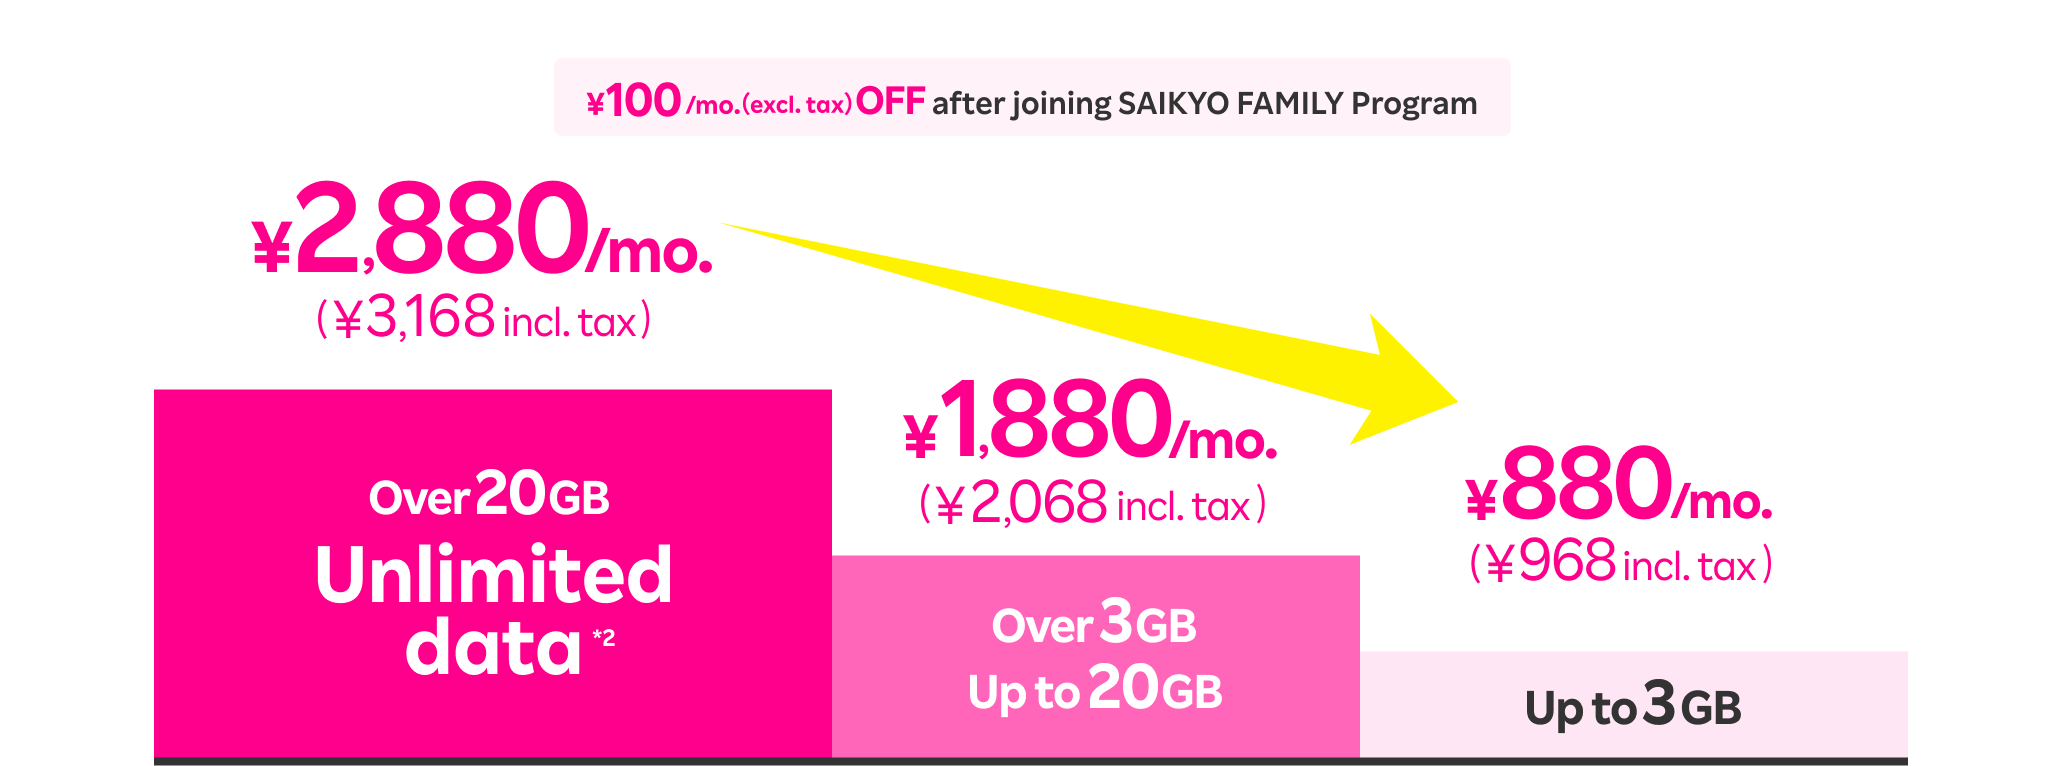 Enjoy up to 3GB for just 880 yen/mo. (968 yen incl. tax) or unlimited high-speed data for 2,880 yen/mo. (3,168 yen incl. tax).